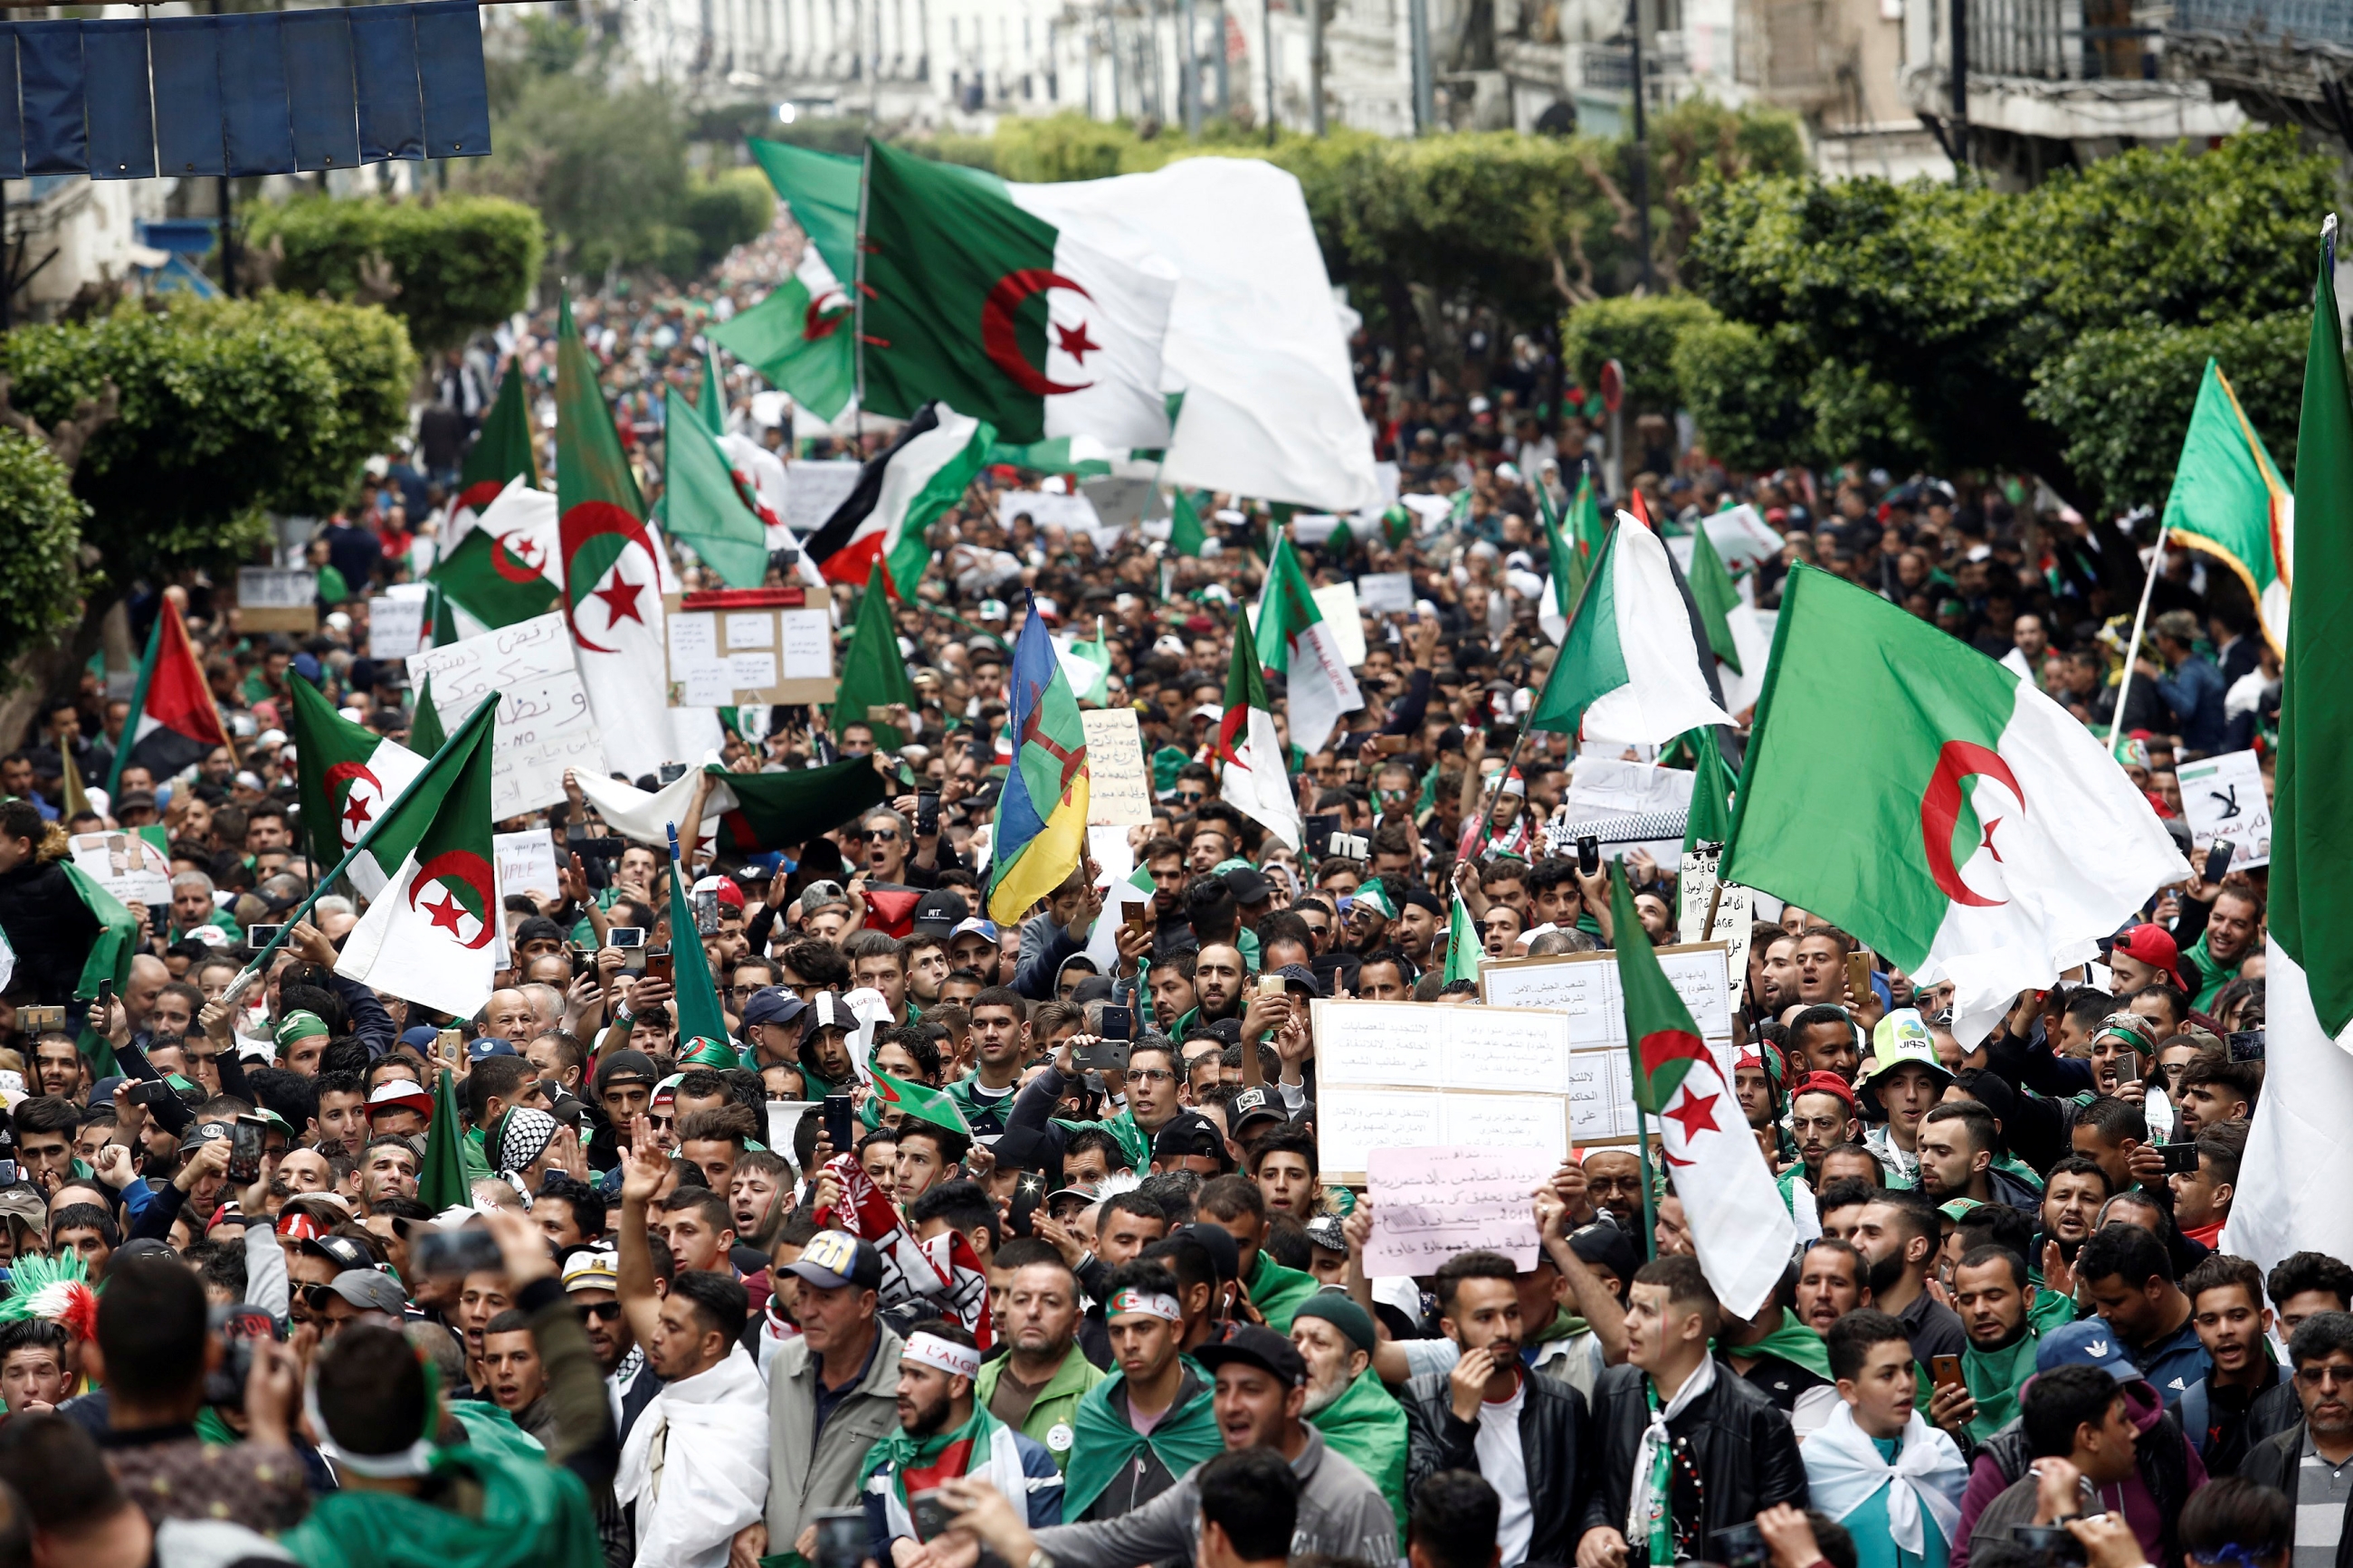 Protesters hold flags and banners in Algiers as they press demands for democratic change, April 19, 2019. 